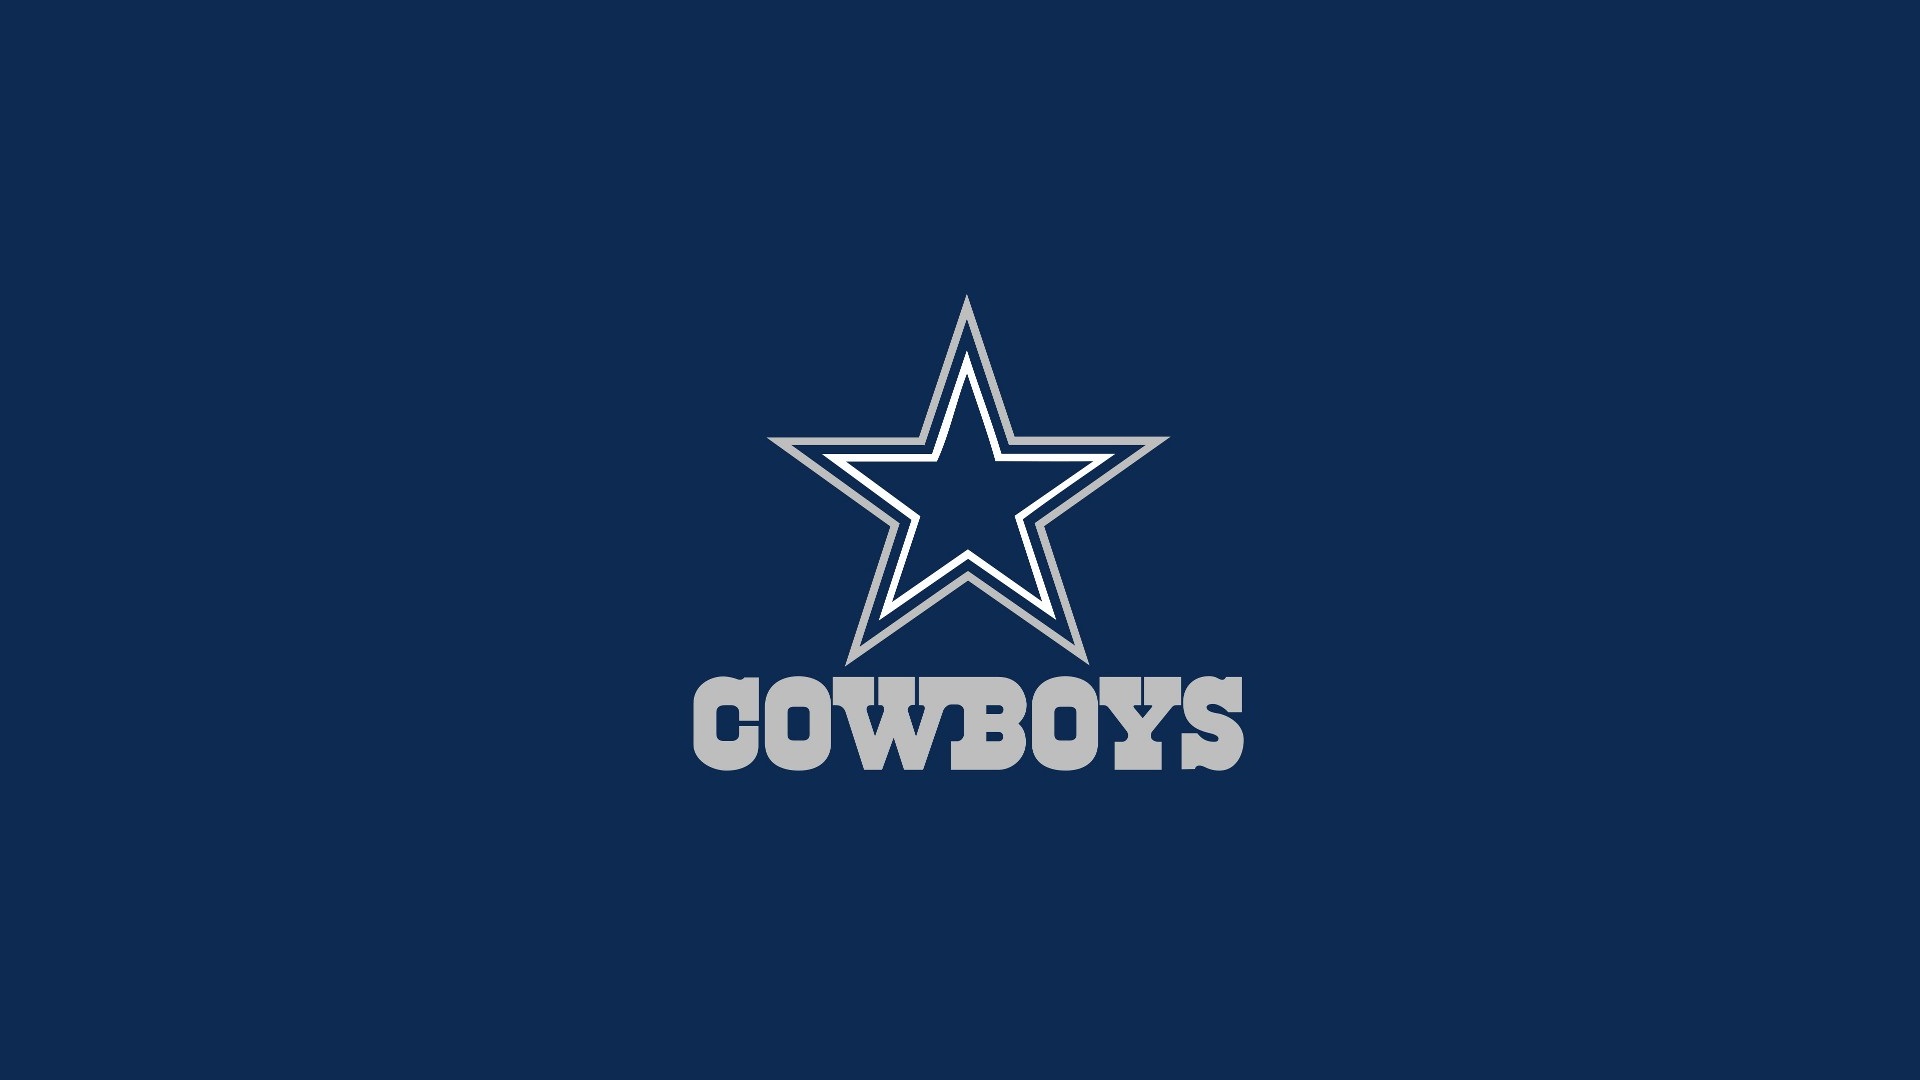 HD Desktop Wallpaper Dallas Cowboys NFL With high-resolution 1920X1080 pixel. You can use this wallpaper for your Mac or Windows Desktop Background, iPhone, Android or Tablet and another Smartphone device